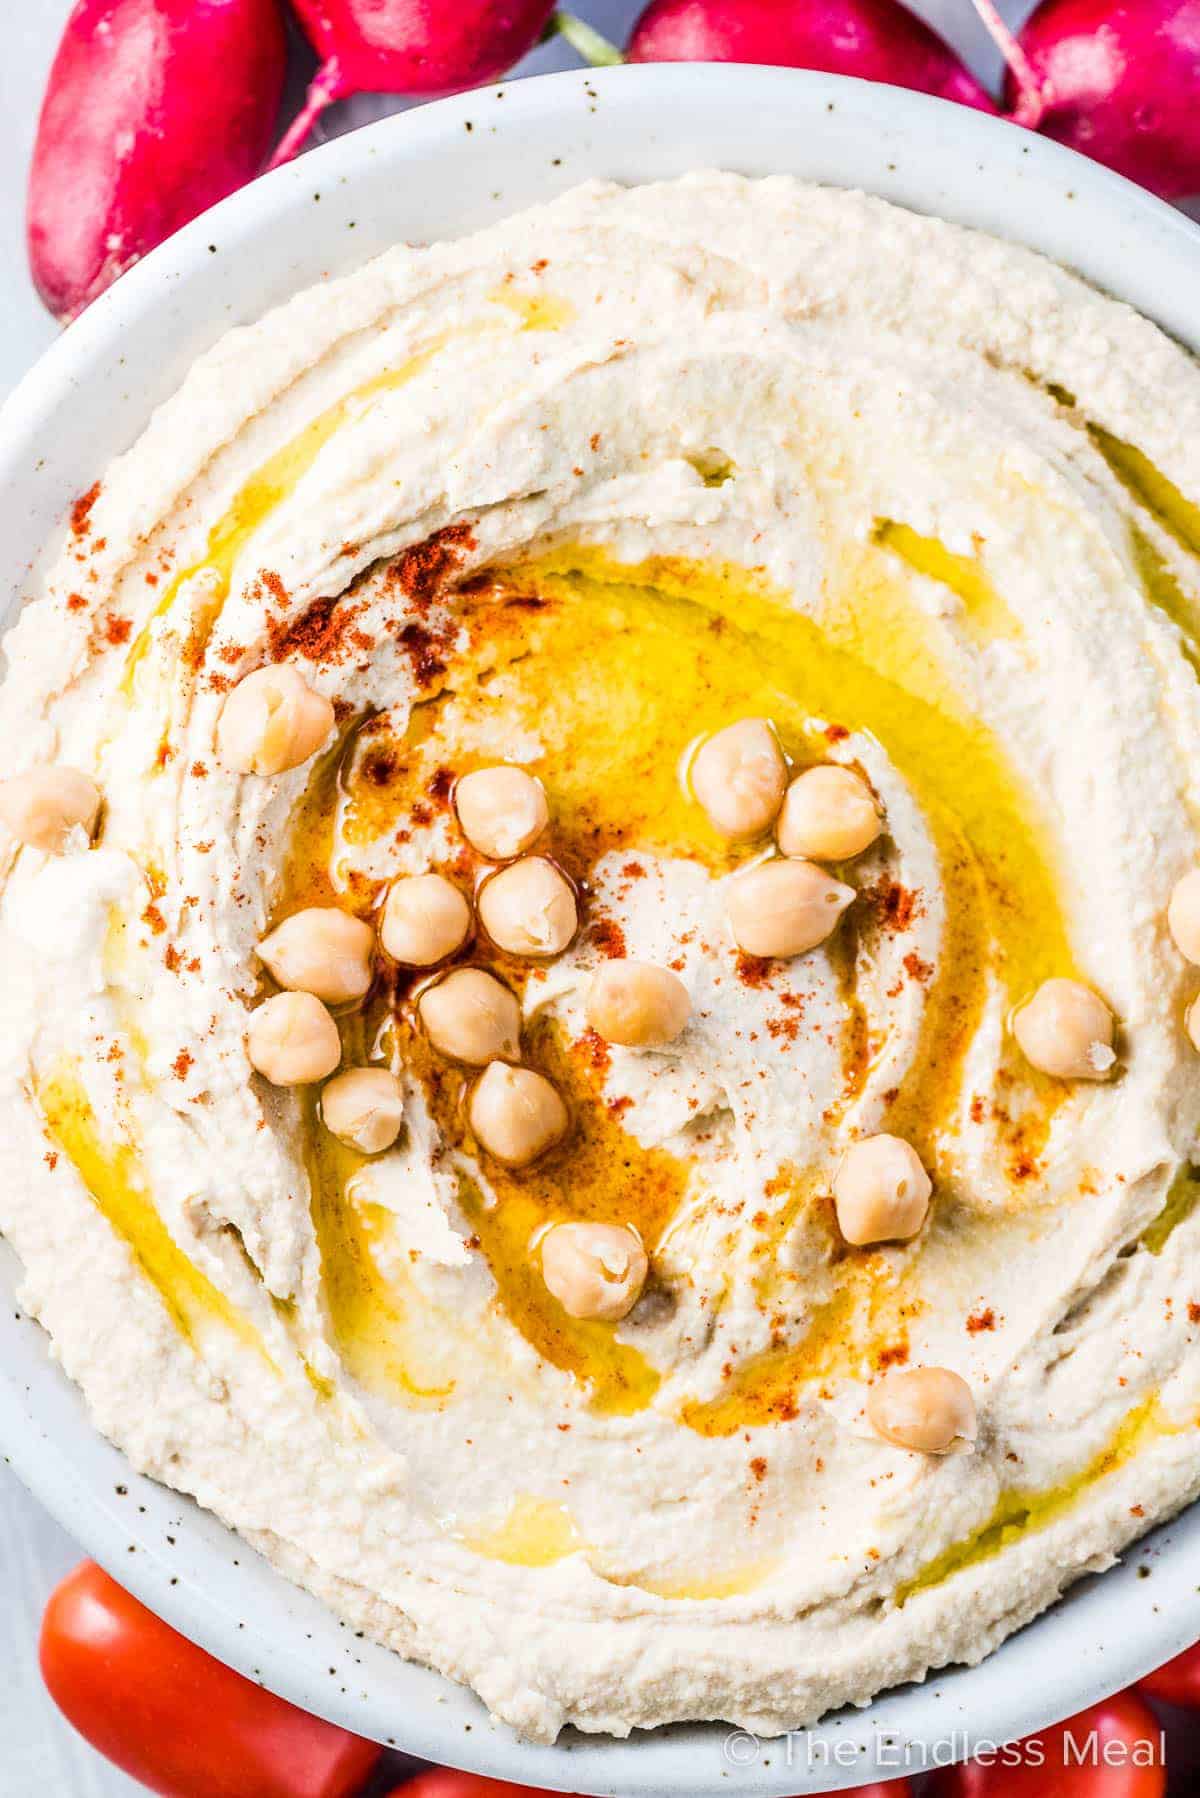 Looking down on a plate of this homemade hummus recipe that's garnished with chickpeas and olive oil.